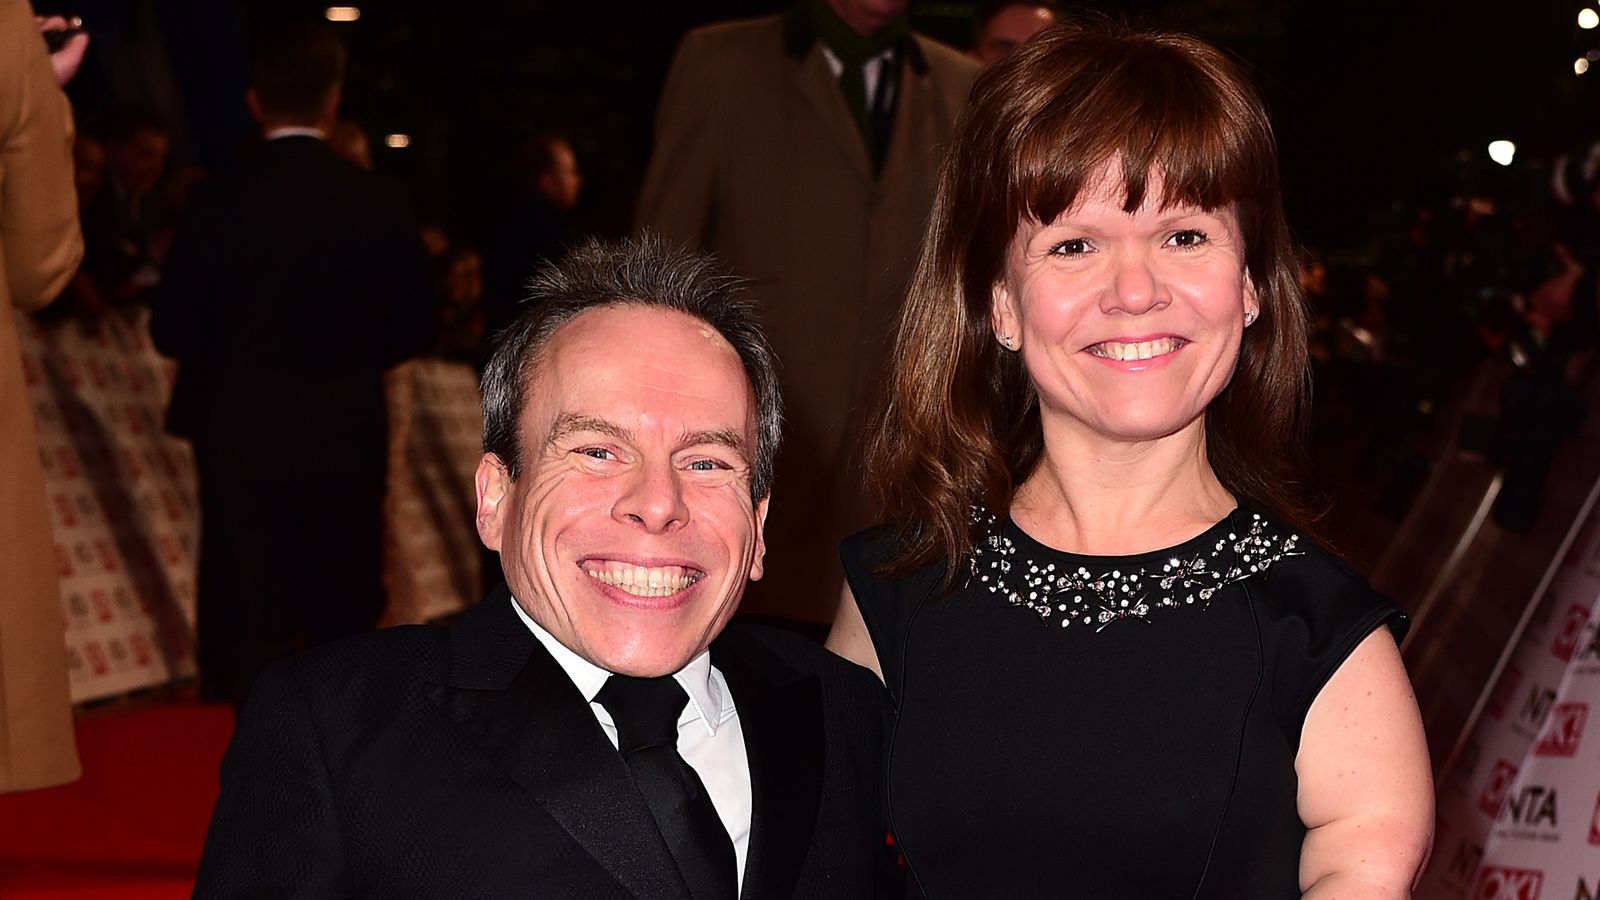 warwick davis apologises for causing concern after social media post